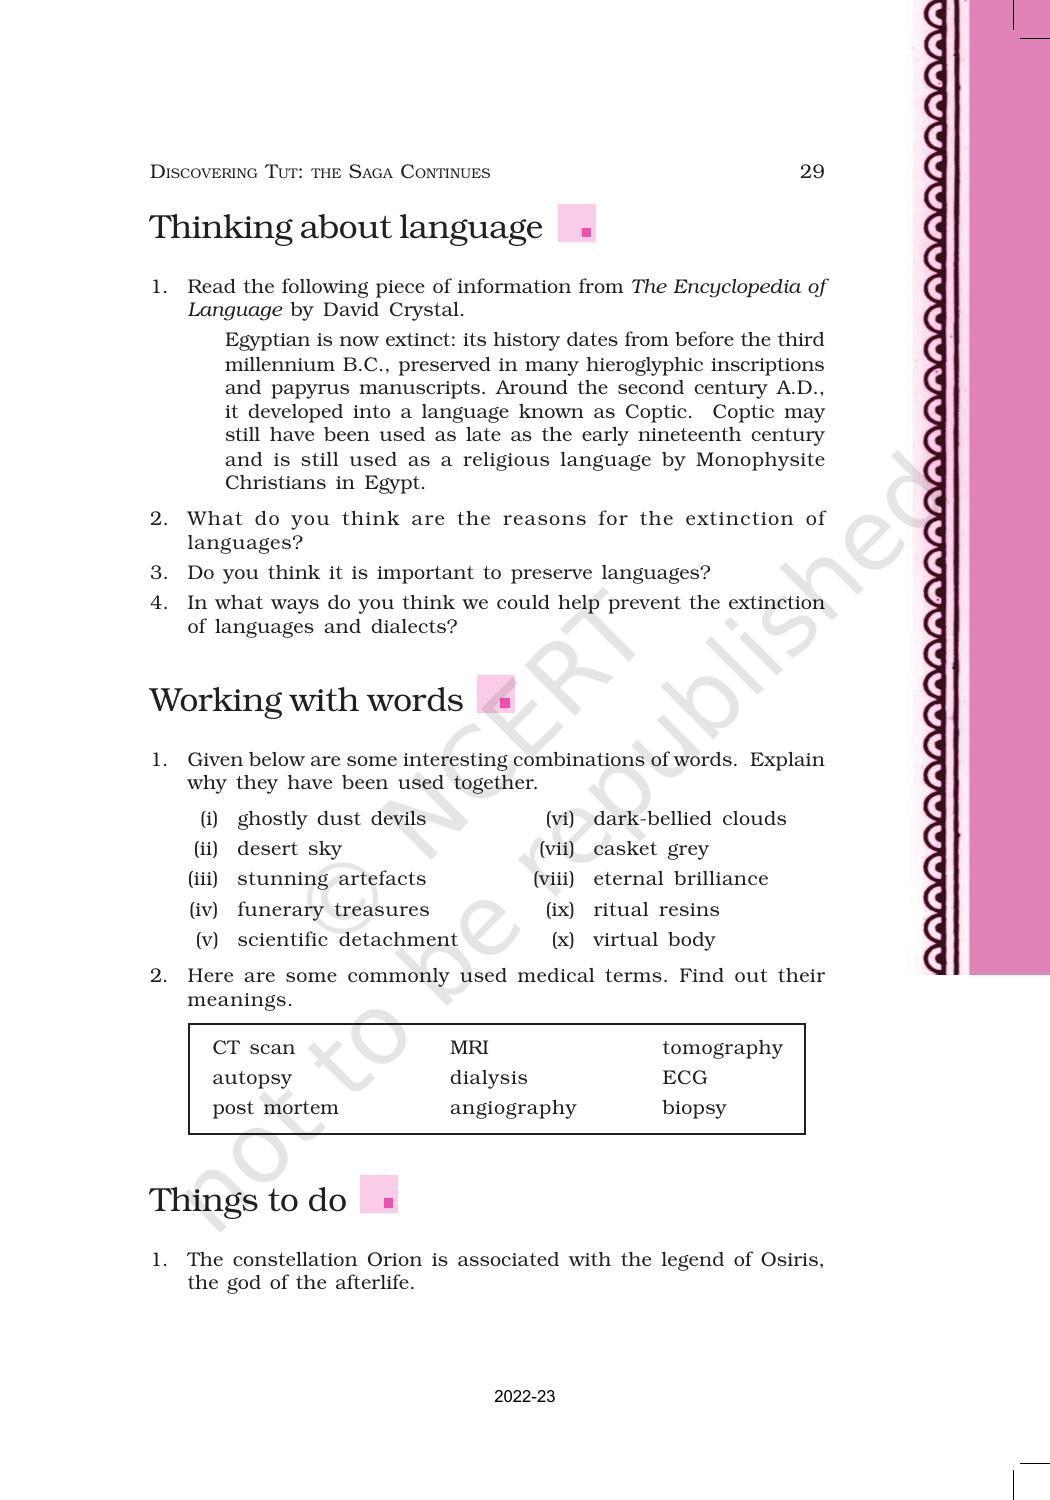 NCERT Book for Class 11 English Hornbill Chapter 3 Discovering Tut: The Saga Continues - Page 8